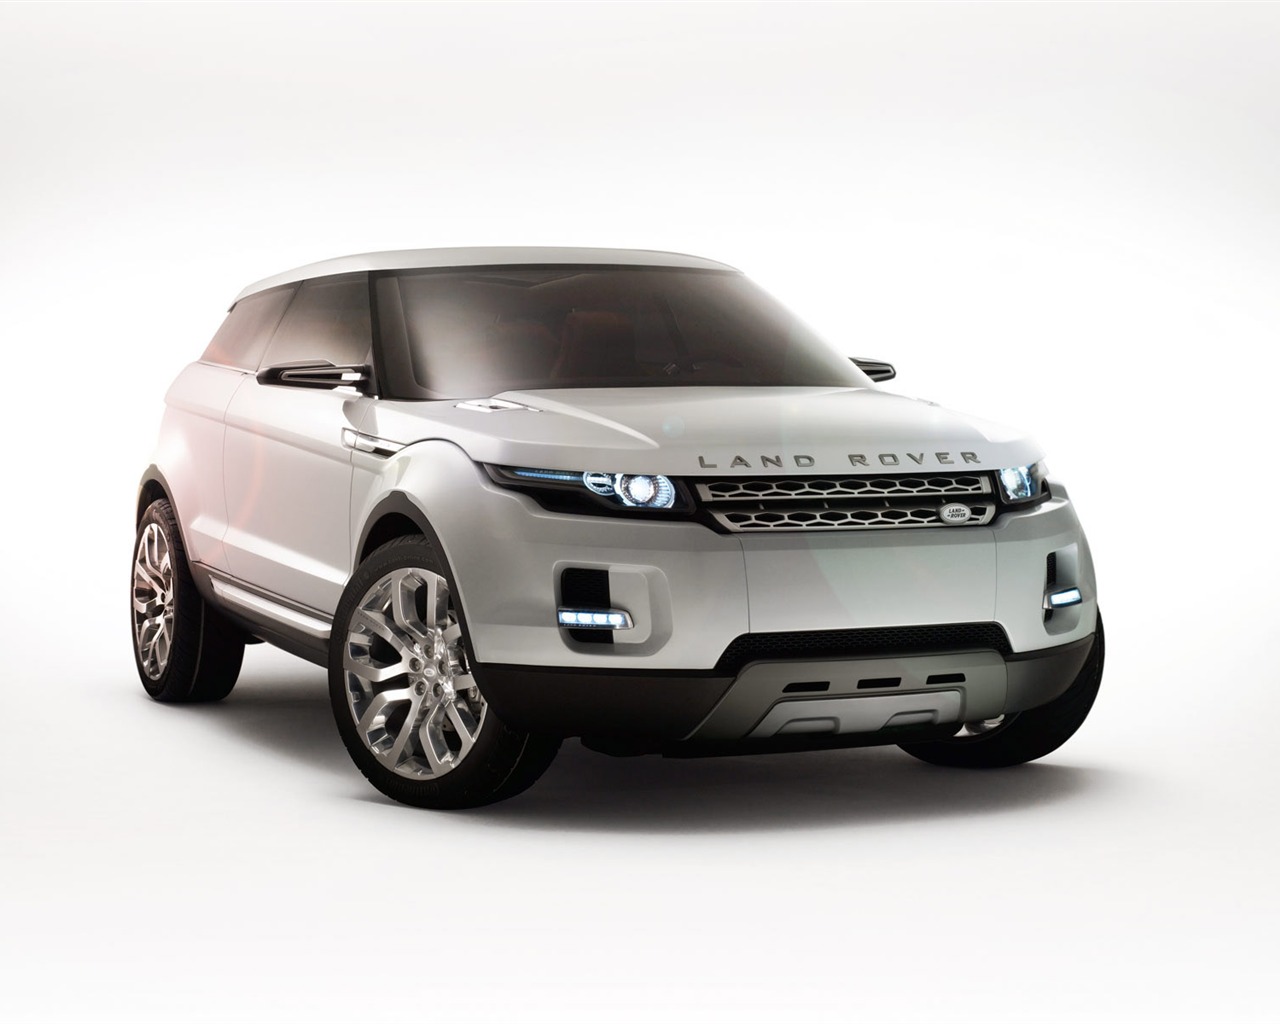 Land Rover Wallpapers Album #8 - 1280x1024